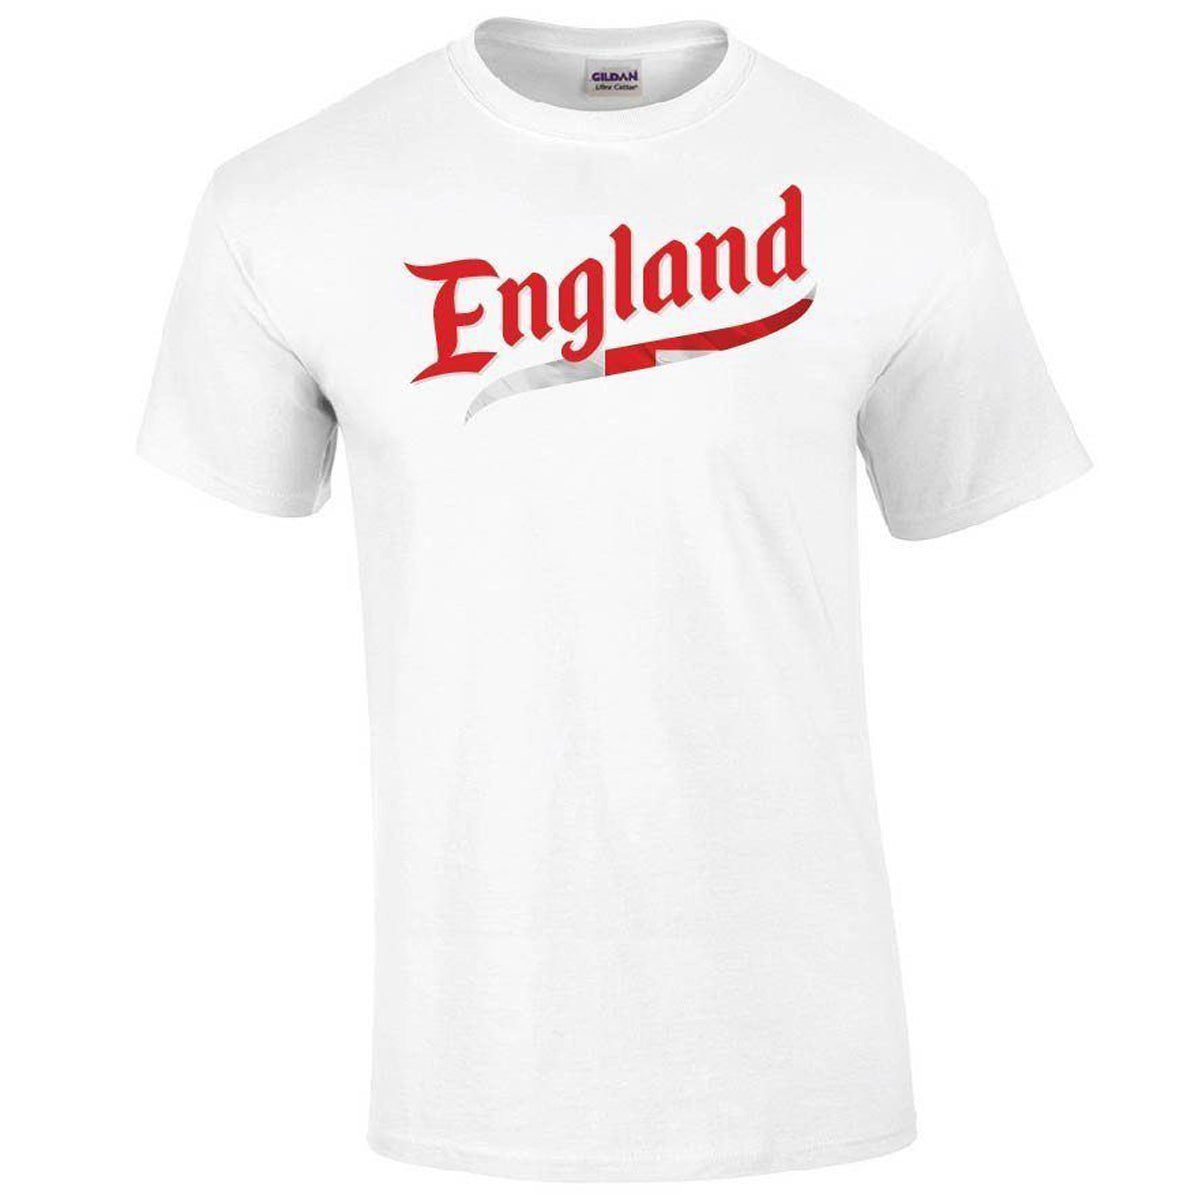 England Script World Cup 2022 Printed Tee T-shirts 411 Youth Medium White Youth